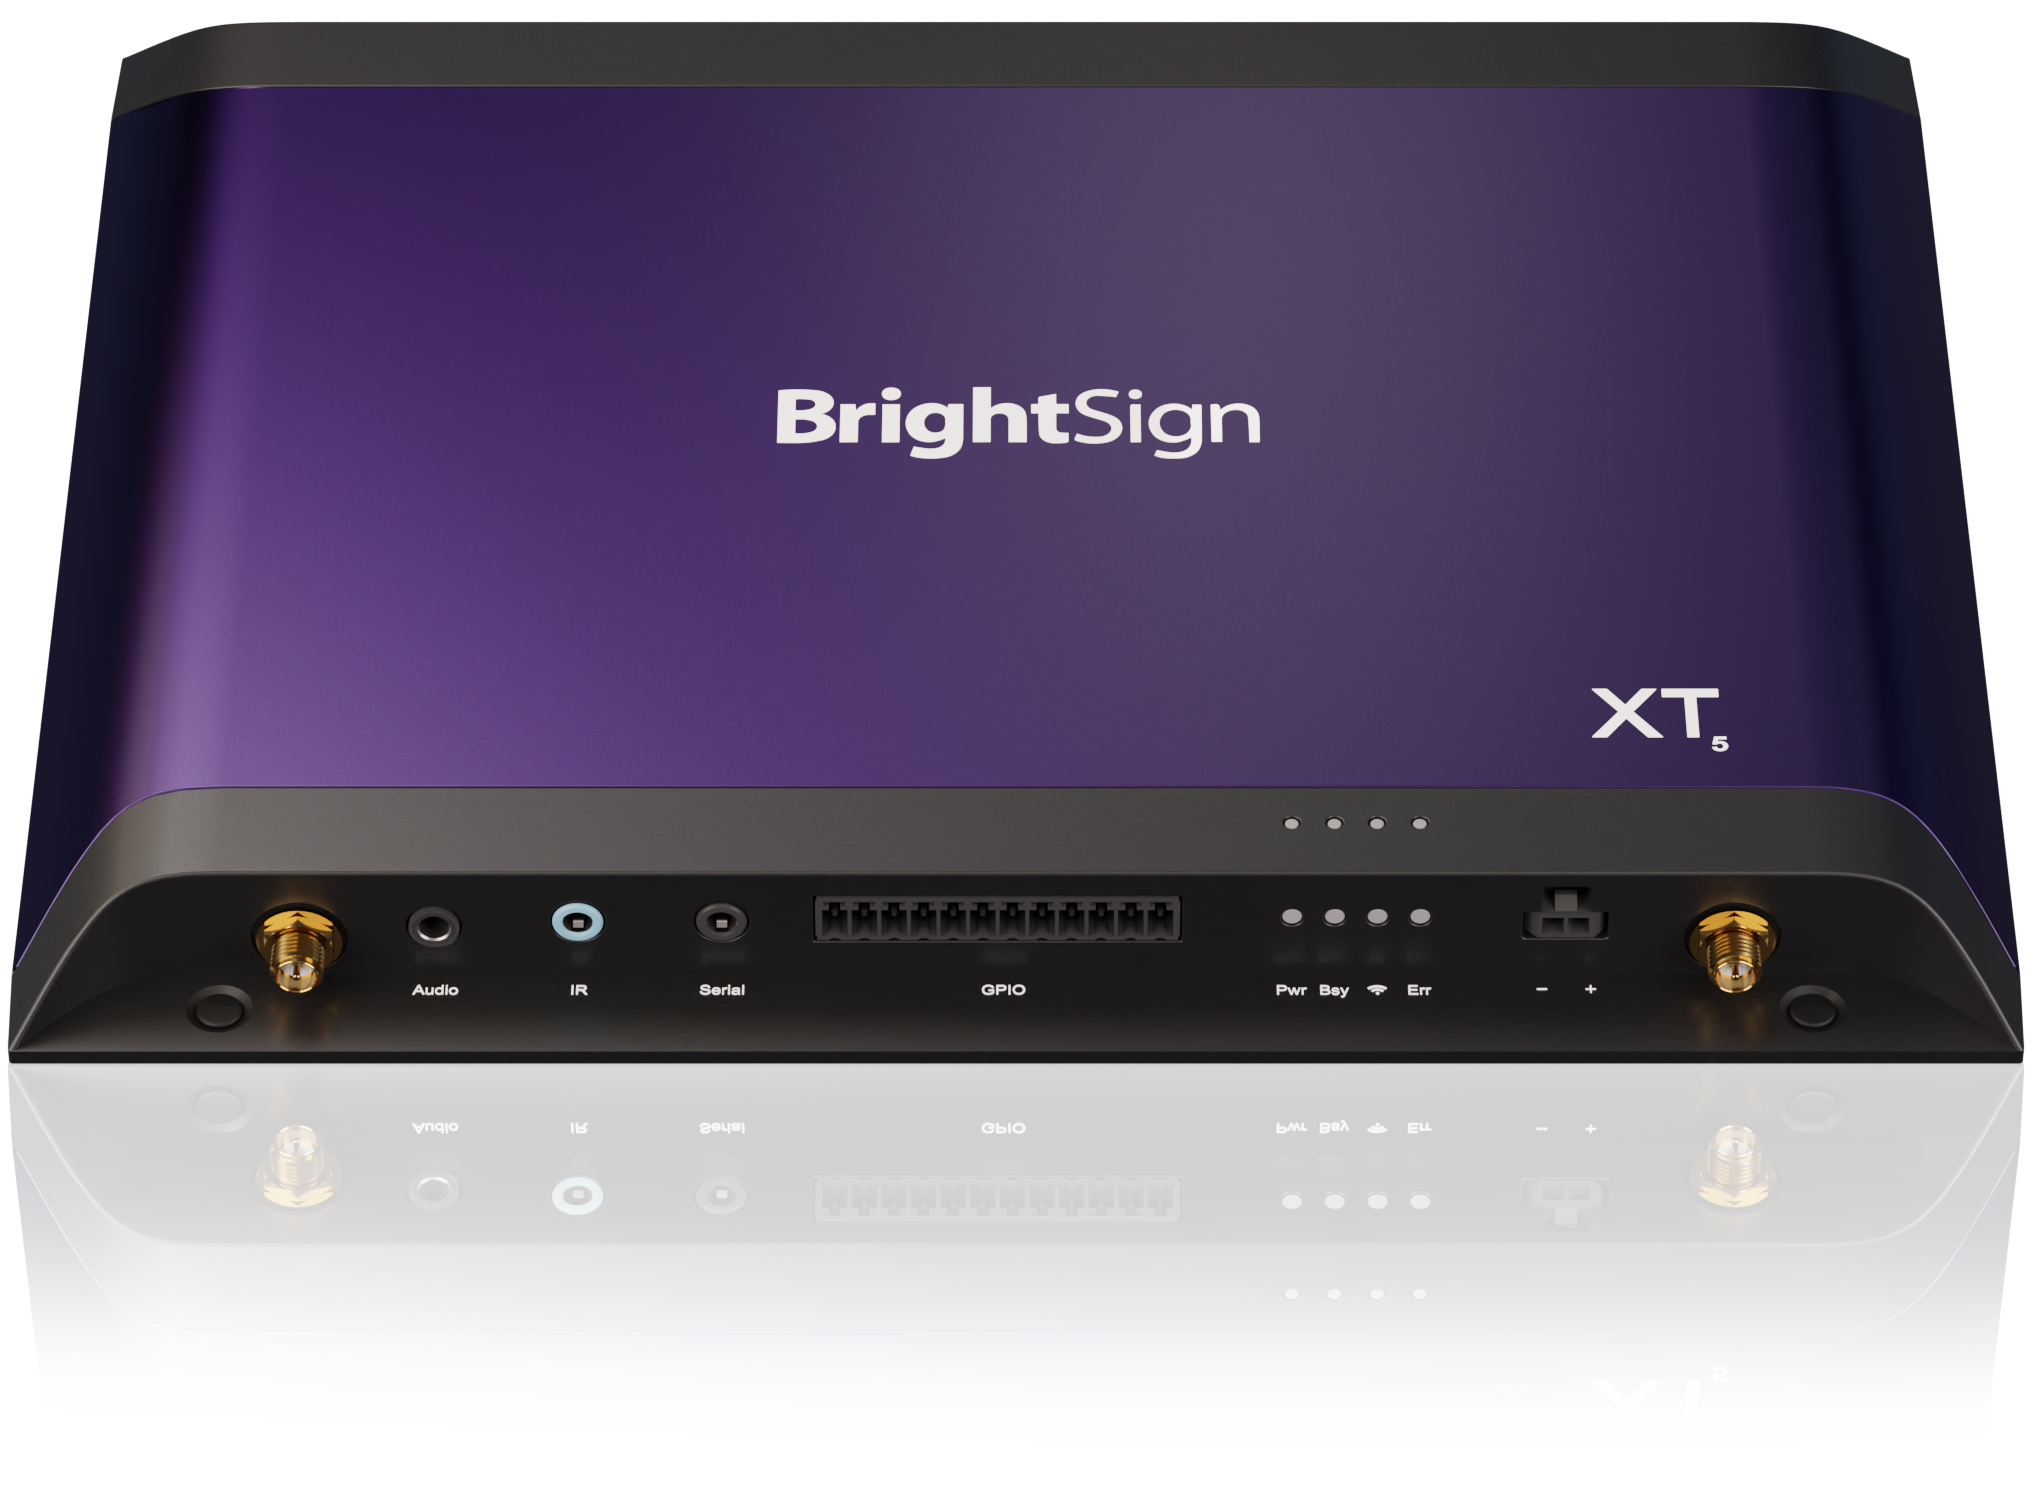 Product image of BrightSign XT5 digital signage players from BrightSign Series 5